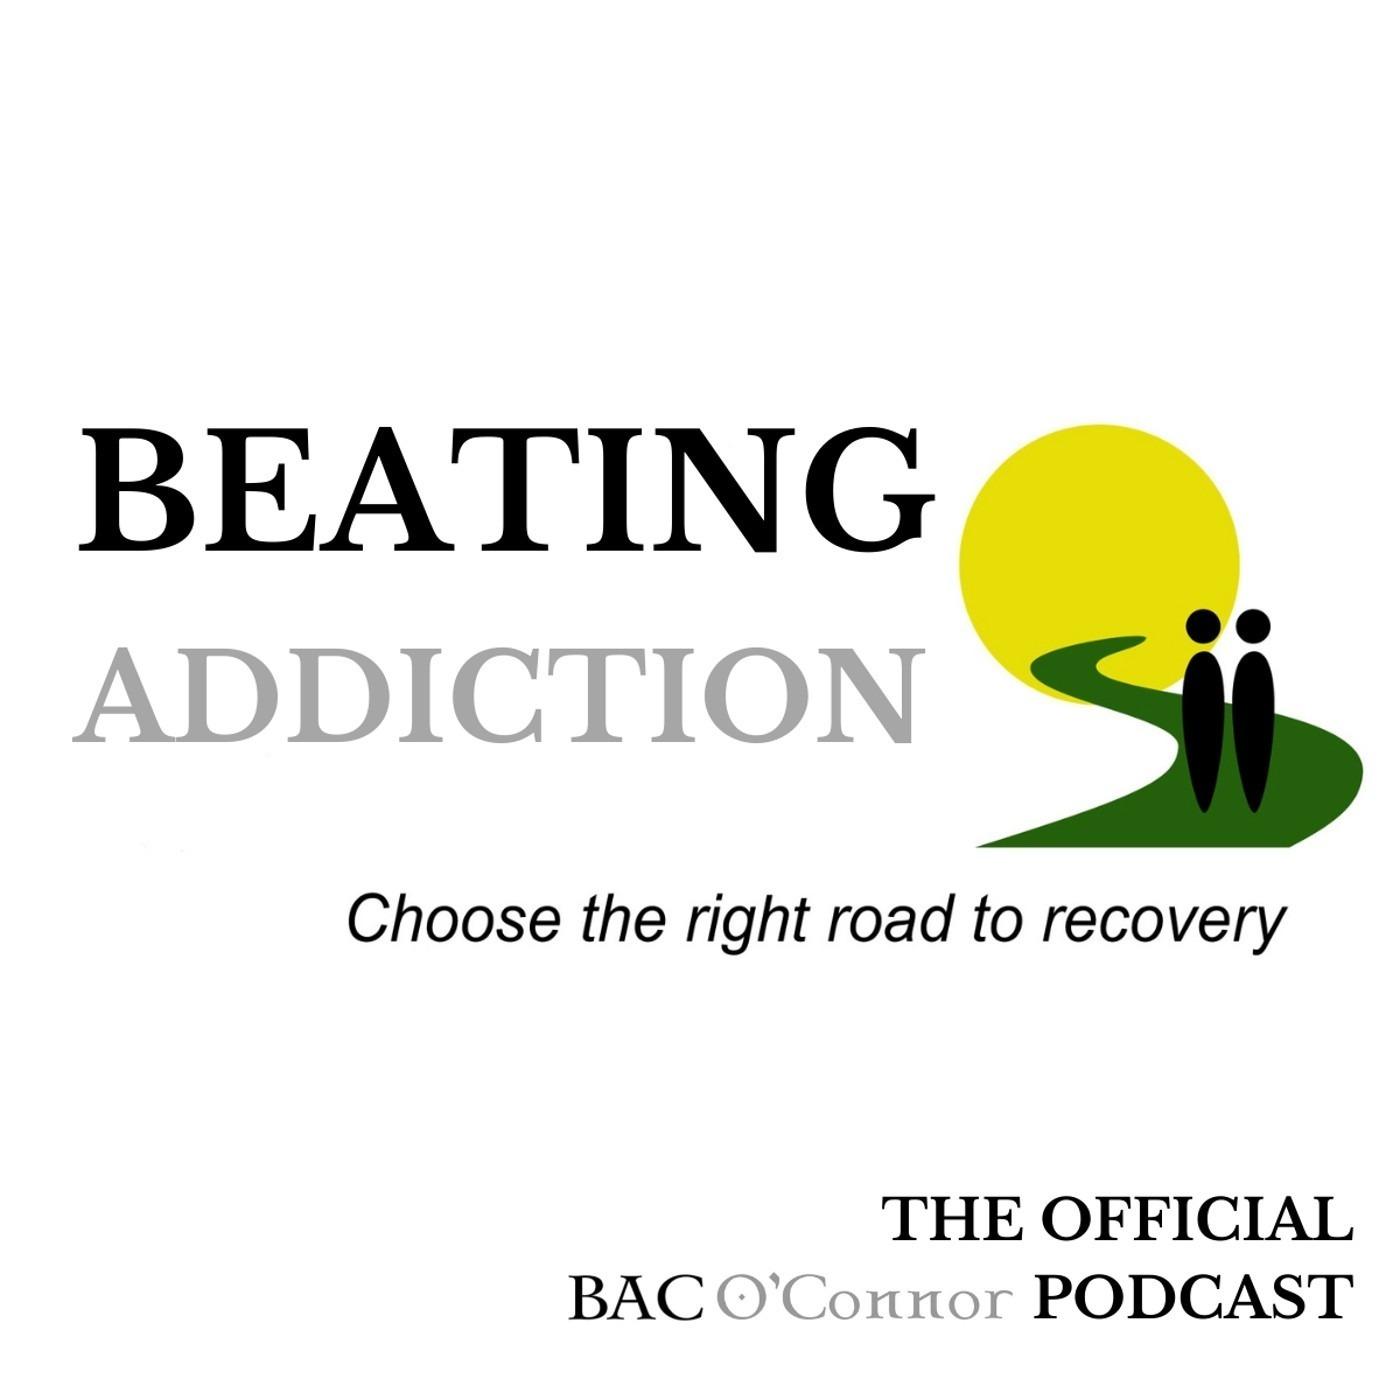 Beating Addiction - Choose the right road to recovery